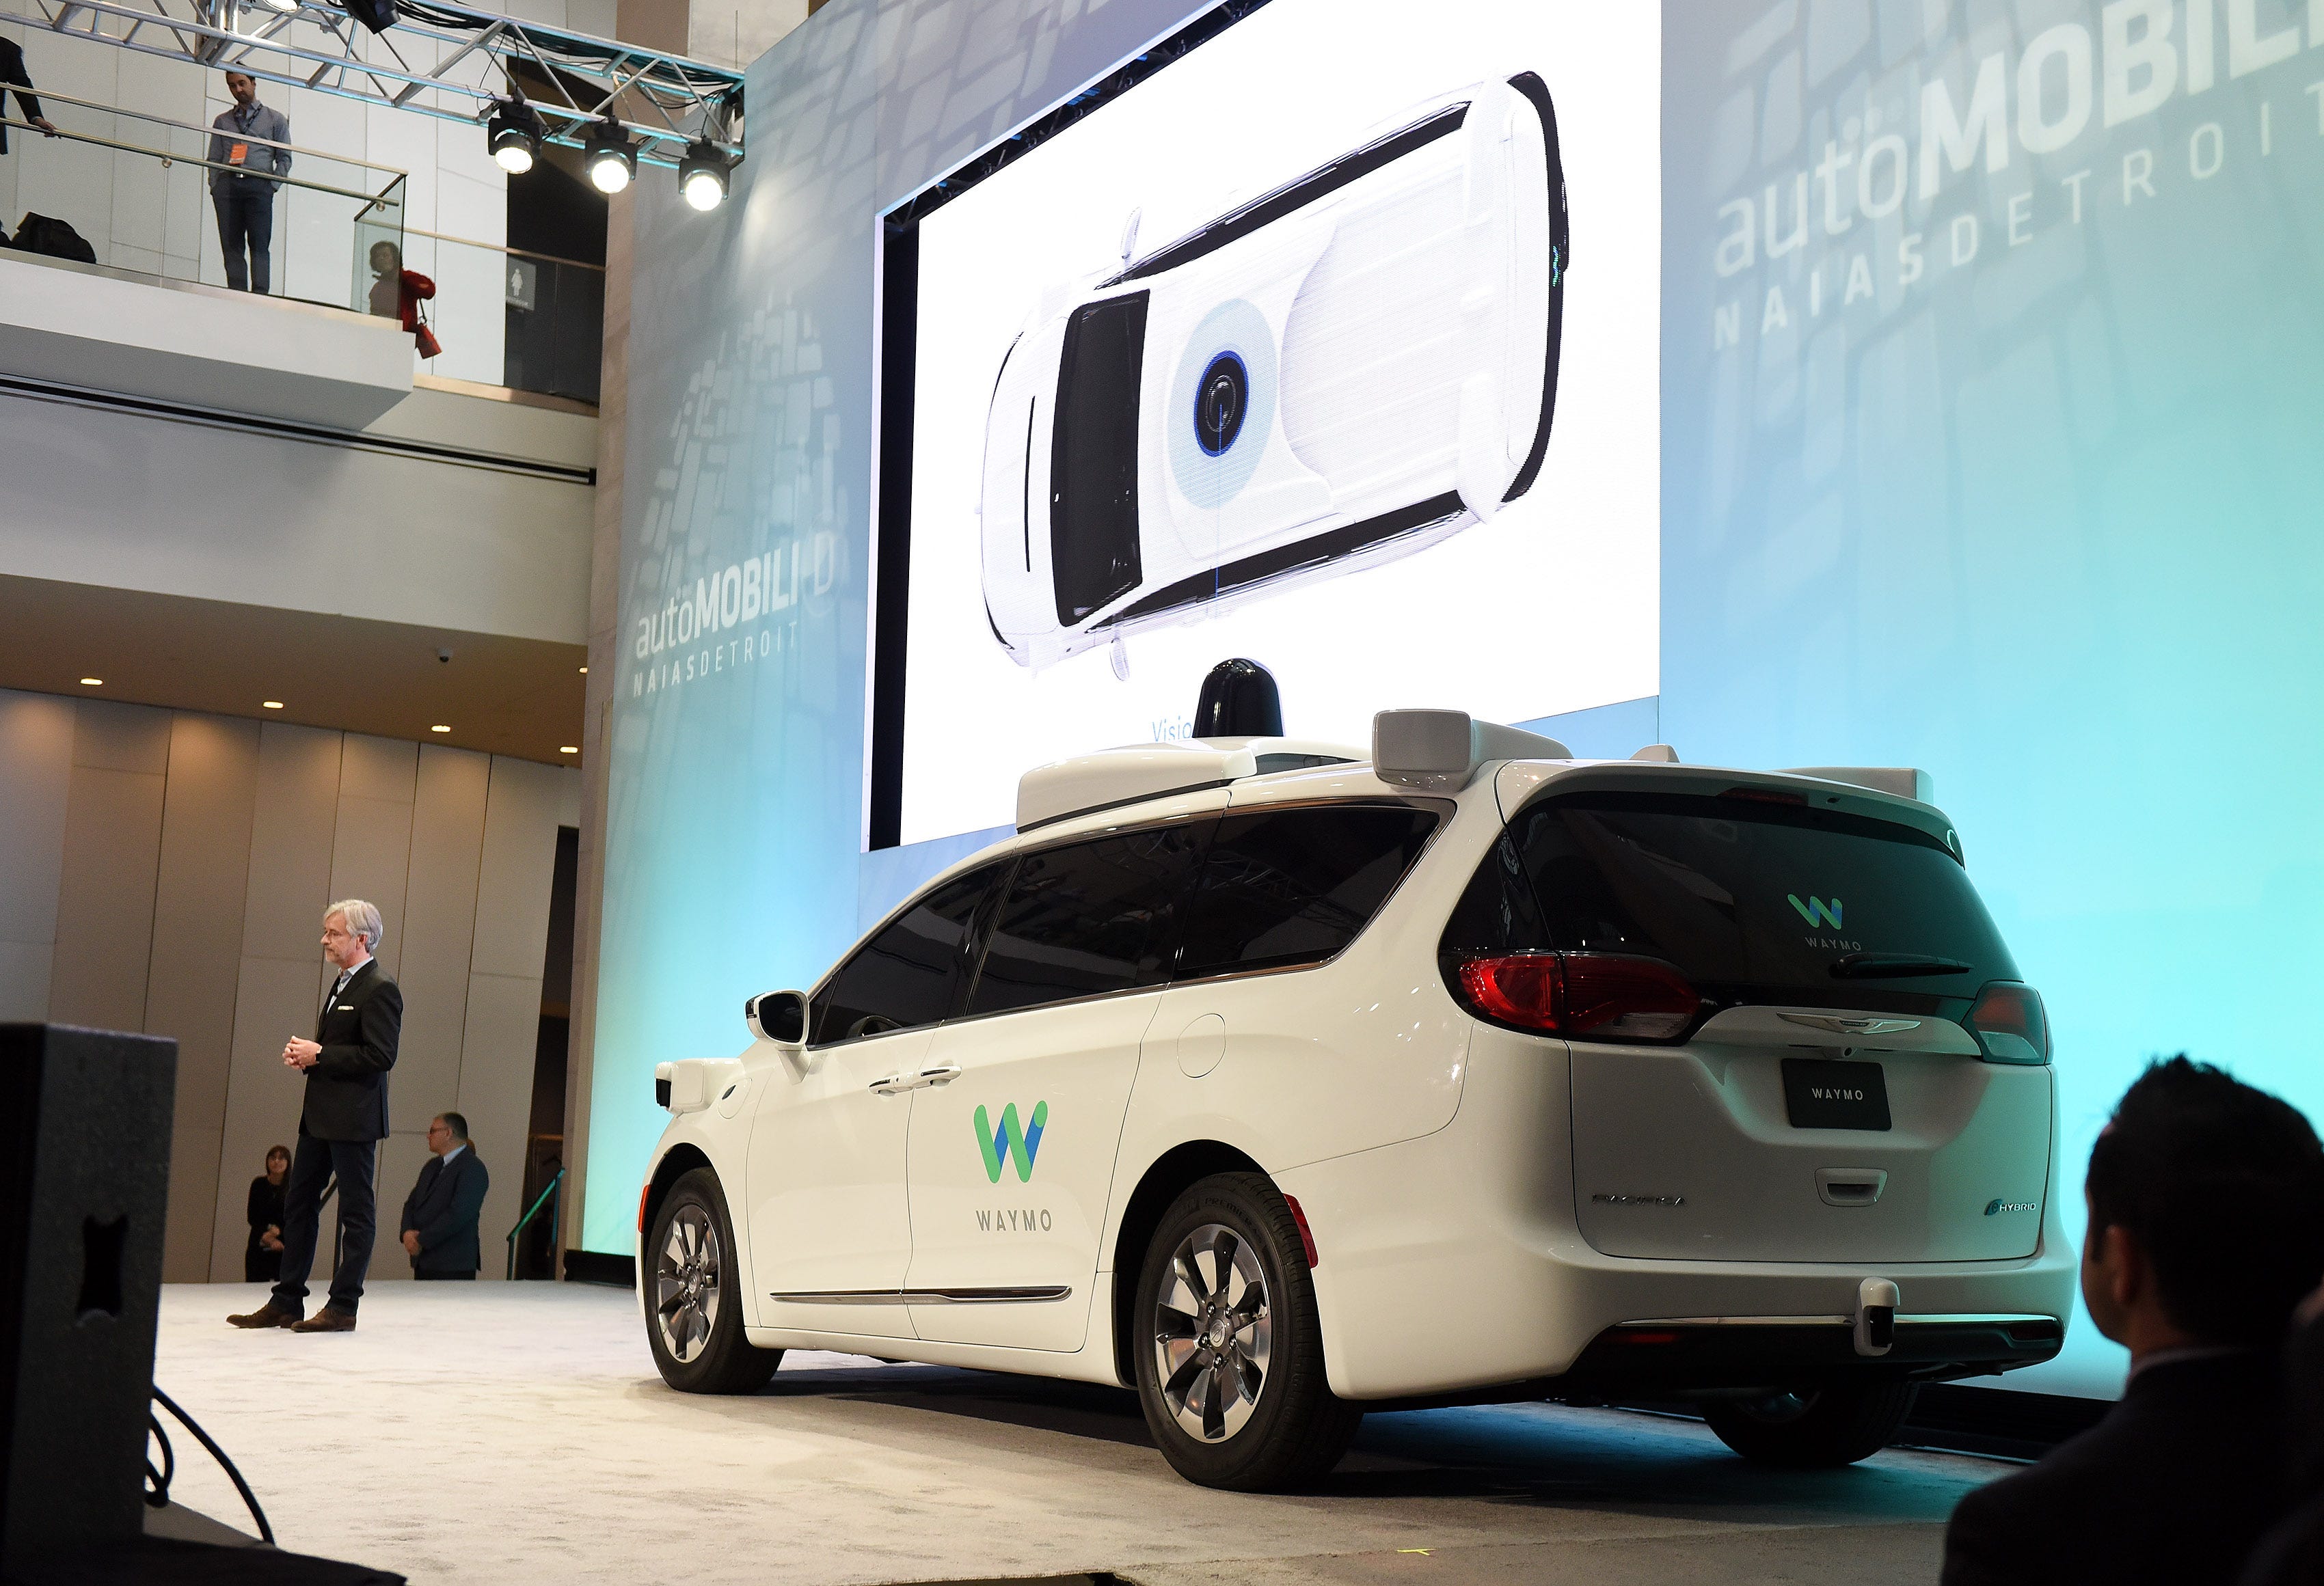 A Chrysler Pacifica is outfitted with Waymo LLC's self-driving system. The Google spinoff says it will invest up to $13.6 million in a facility in Detroit to integrate its technology into automaker partners' vehicles.